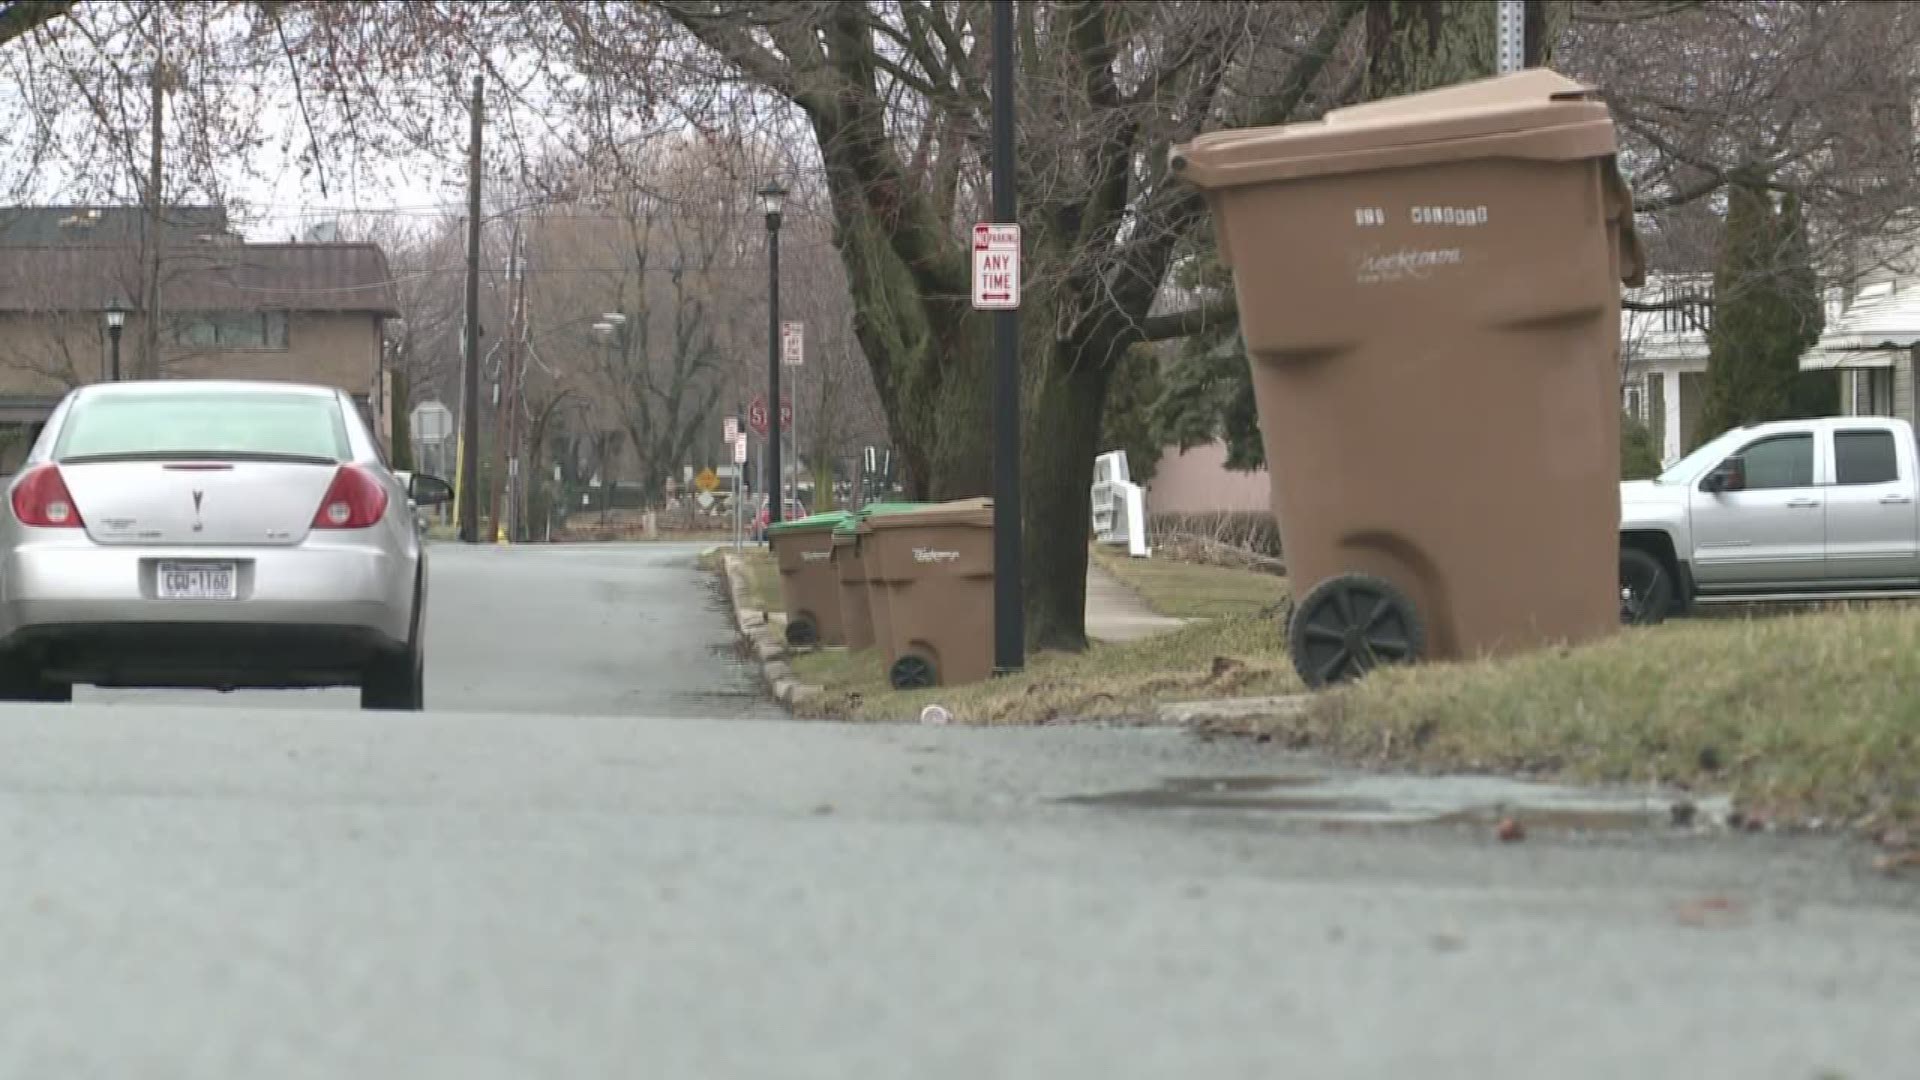 The amendment would make it so the town would not pick up grass clippings. In the resolution it states, if a person would bring it to the sanitation department.